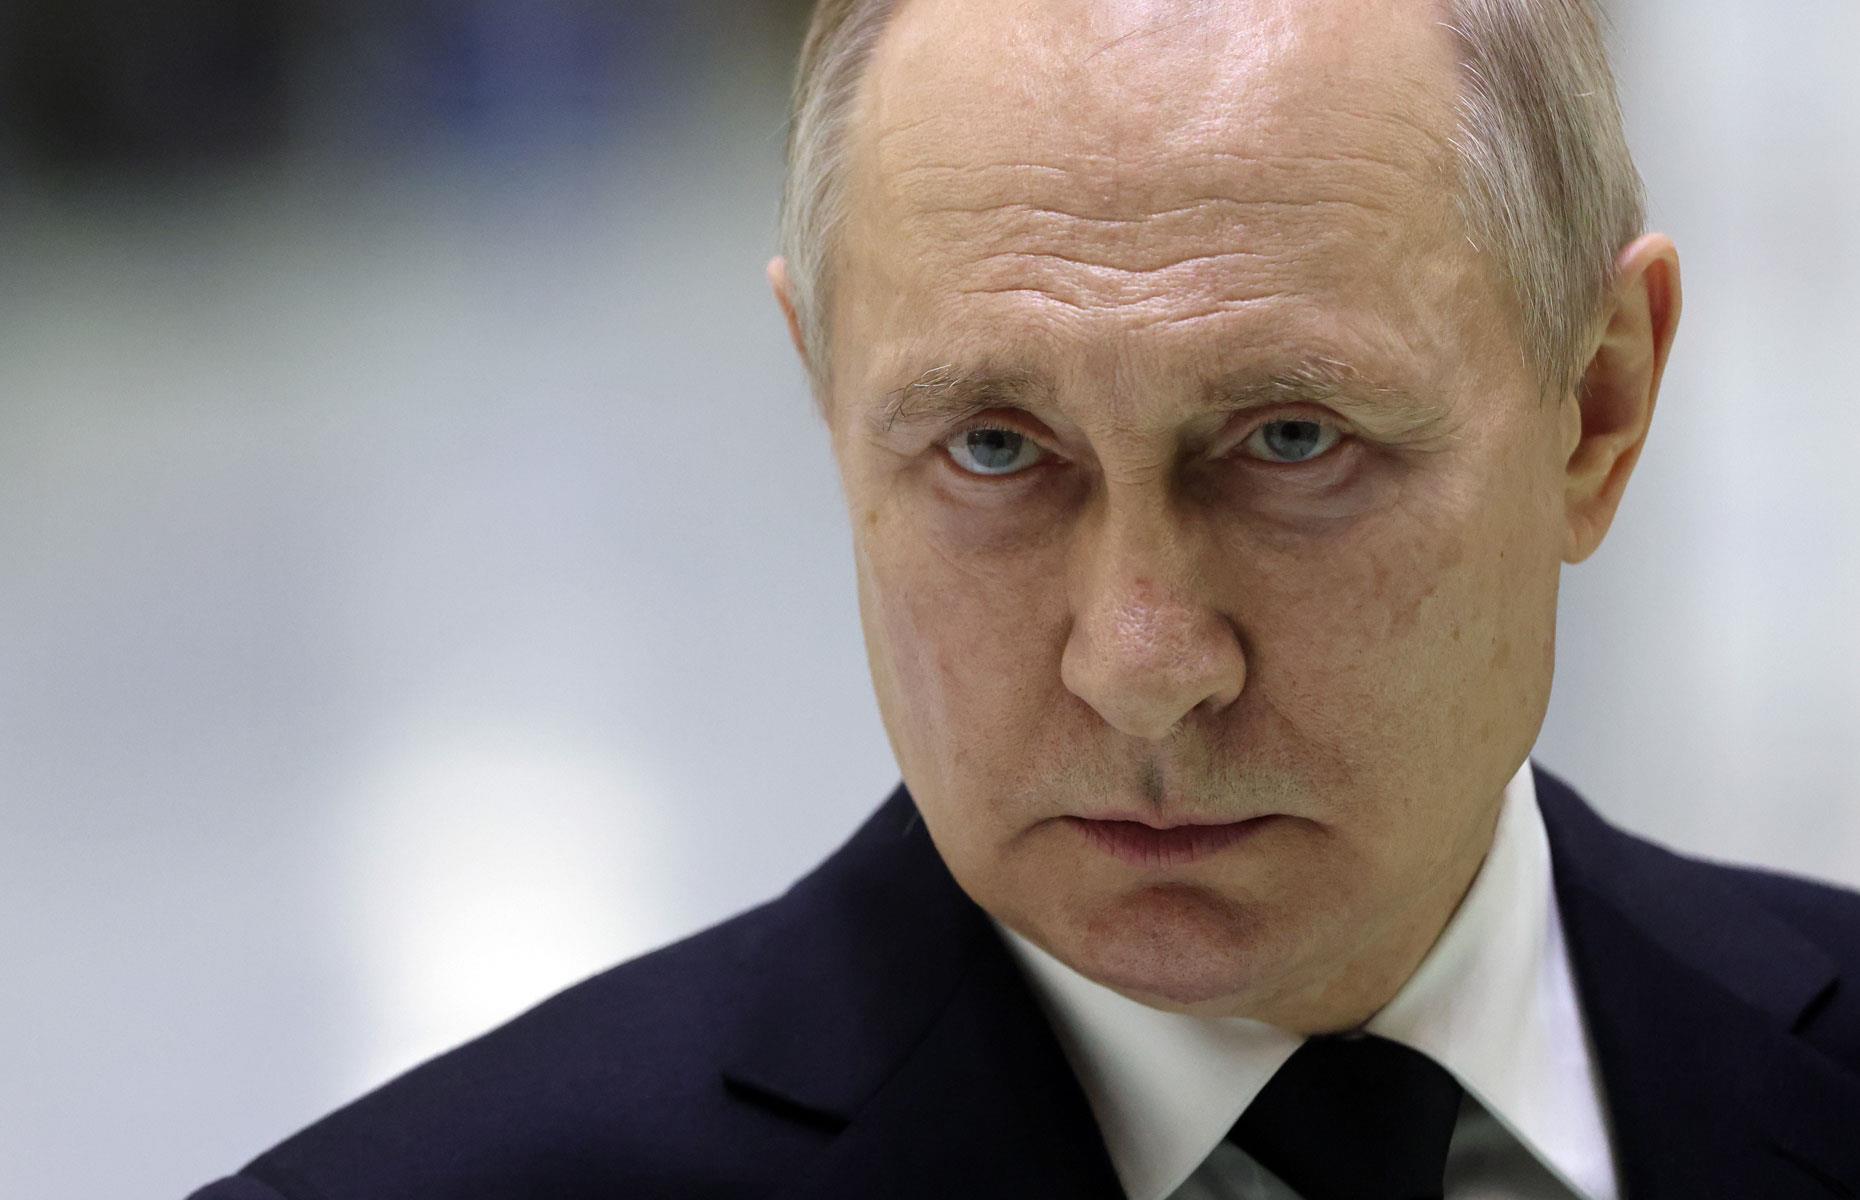 Revealed: Putin's Staggering Fortune As Ordinary Russians Struggle